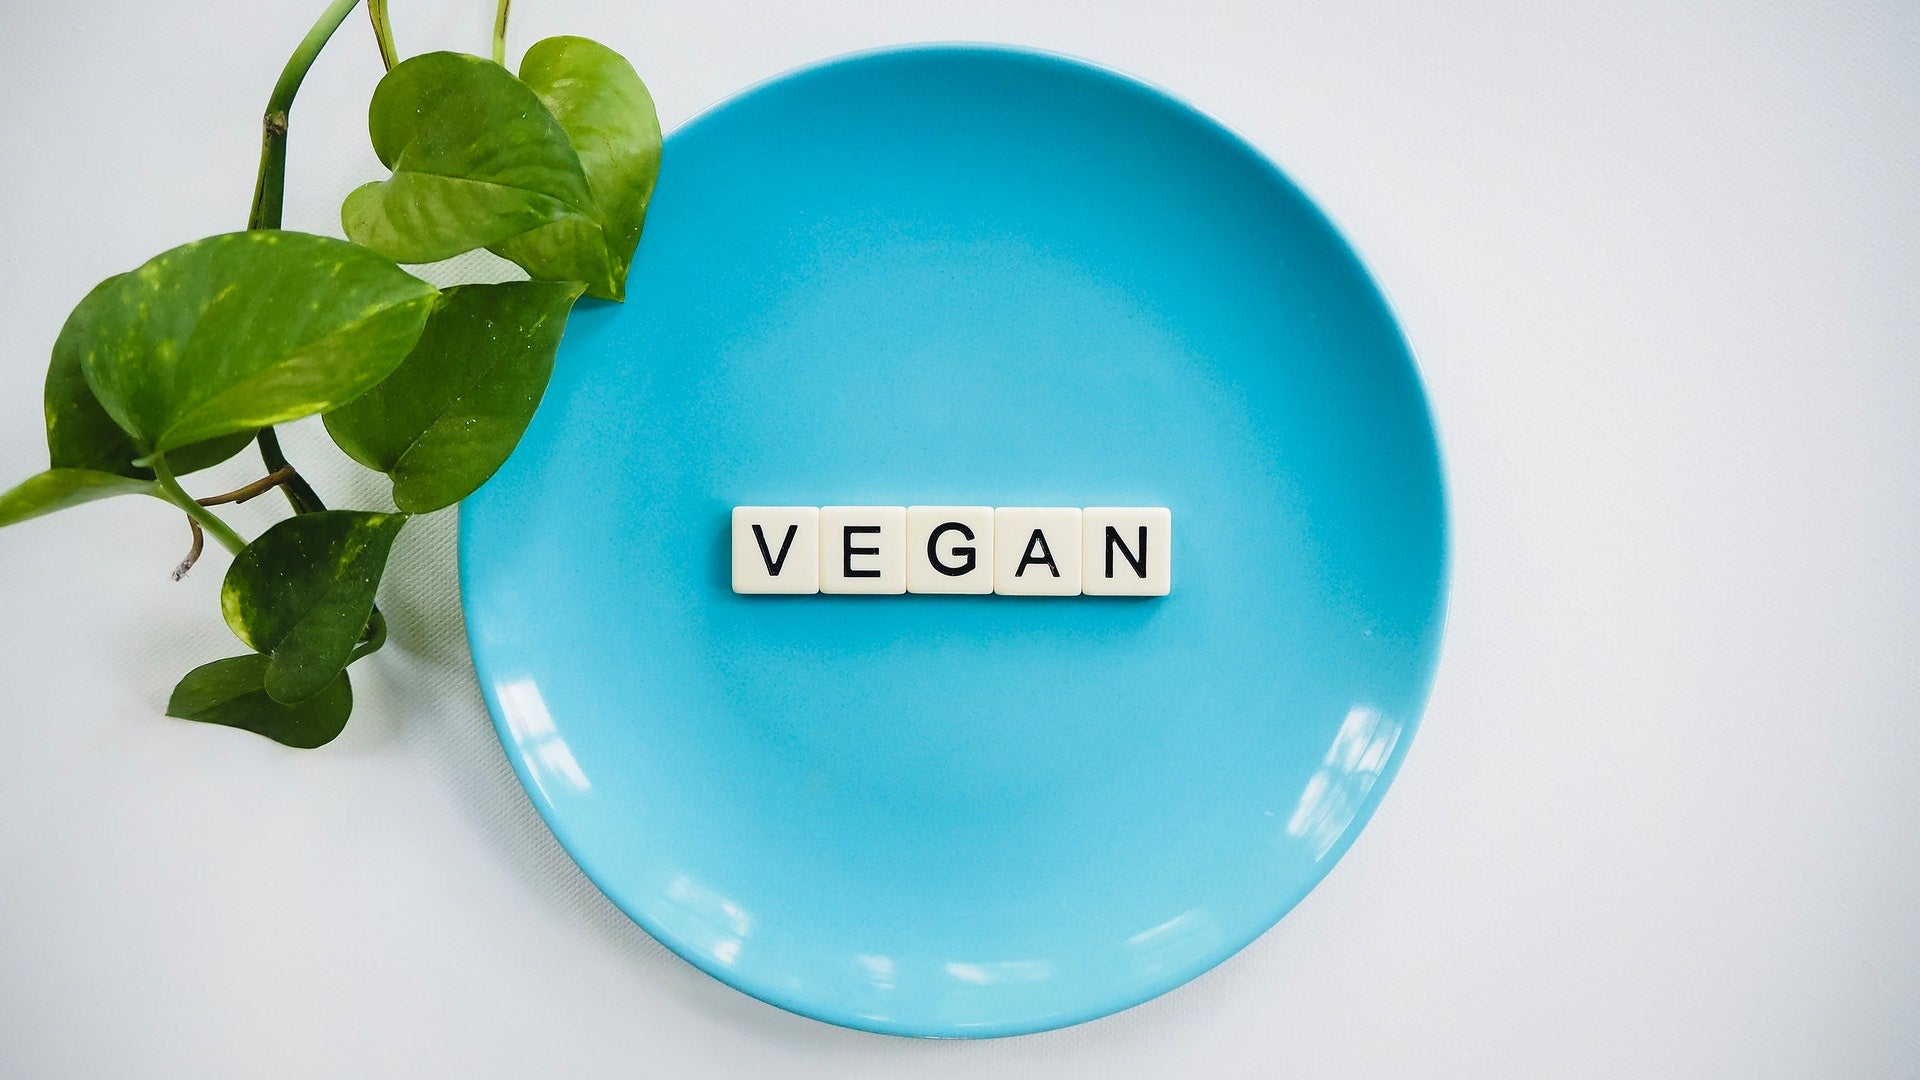 Veganuary: Making the Transition in 2021